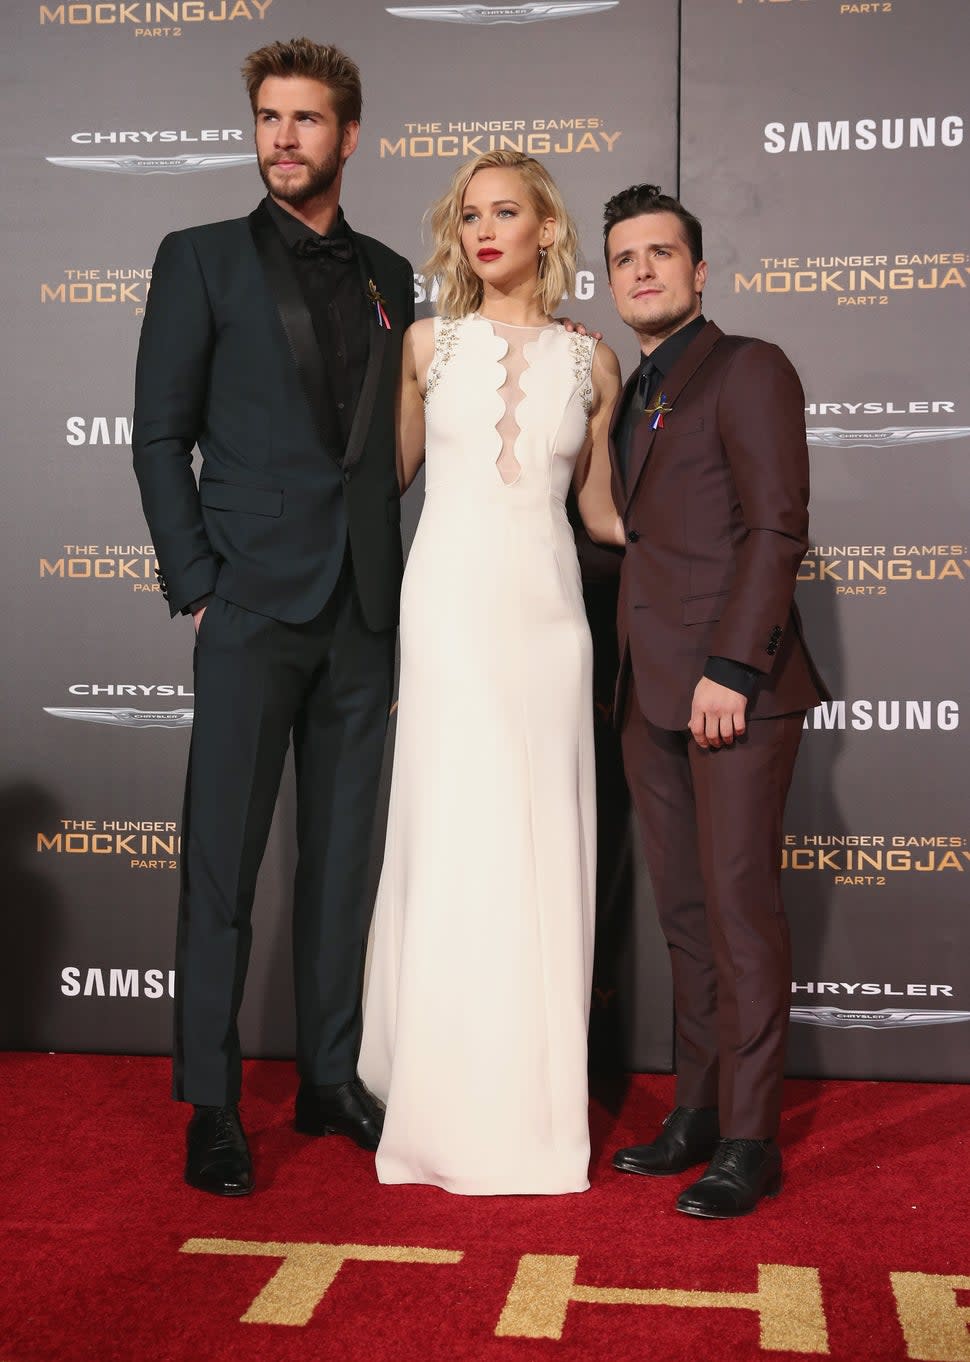 Liam Hemsworth, Jennifer Lawrence and Josh Hutcherson attend premiere of Lionsgate's The Hunger Games: Mockingjay - Part 2 at Microsoft Theater on Nov.16, 2015 in Los Angeles, California.